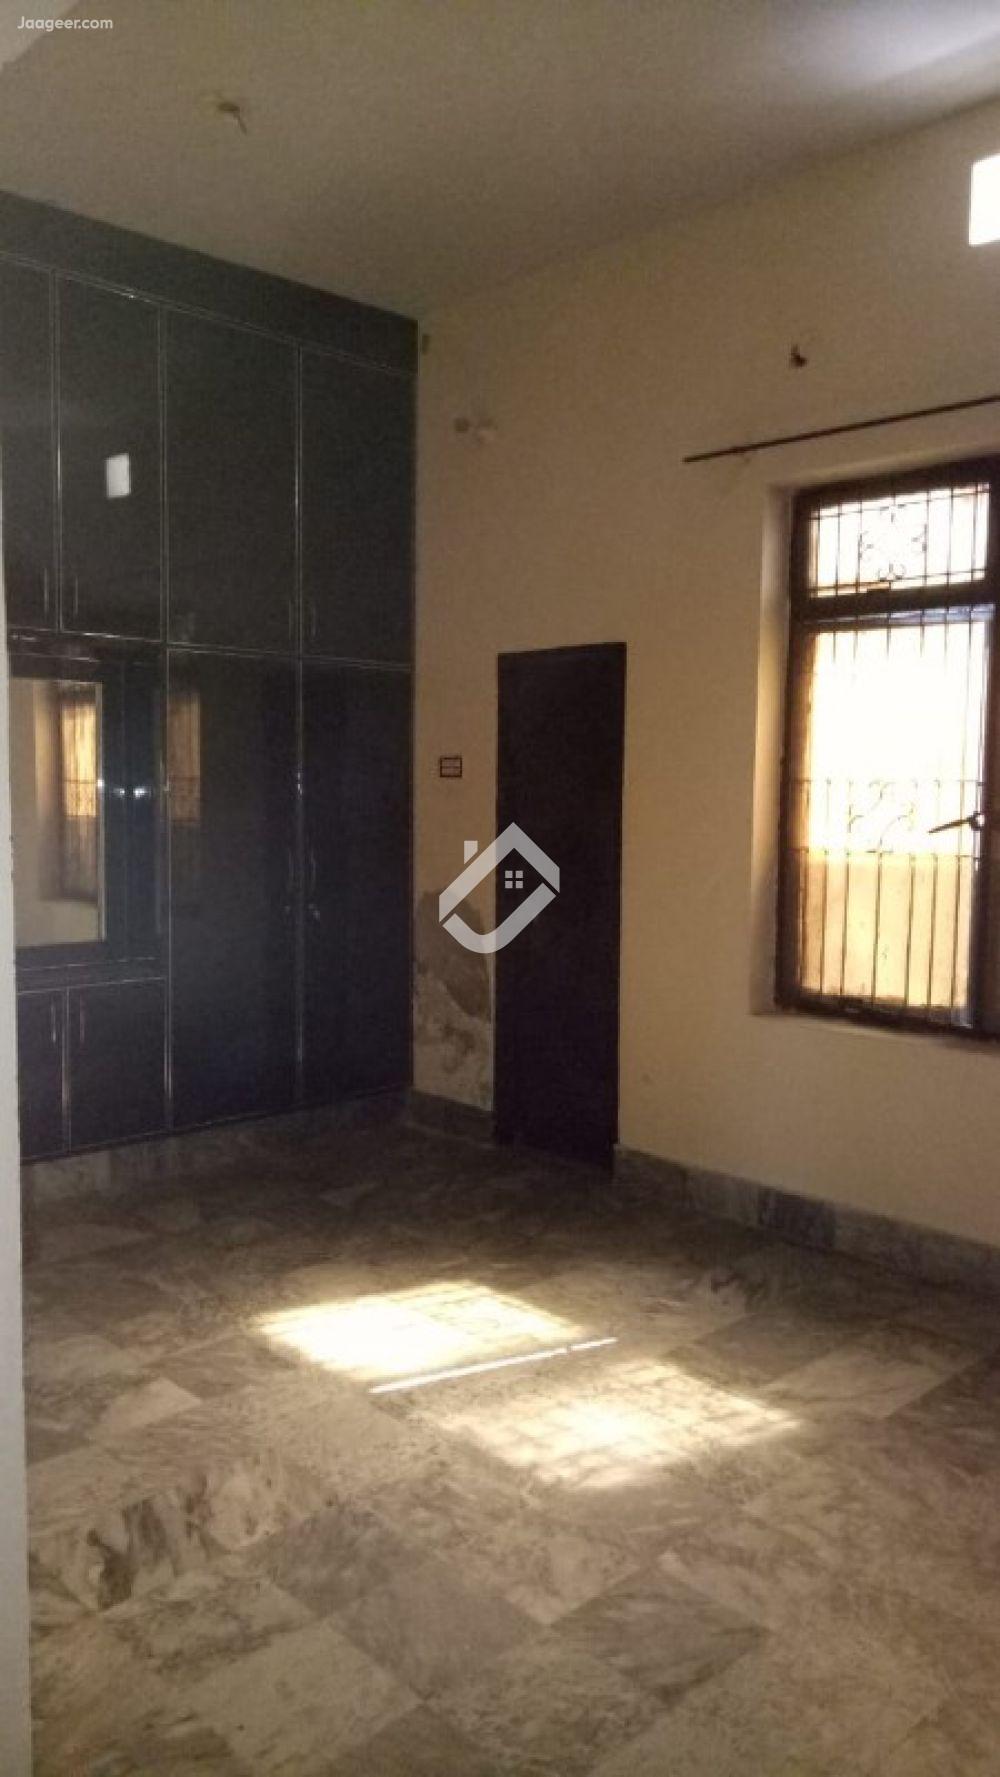 View  5 Marla Lower Portion House For Rent In Asad Park Phase 1 in Asad Park , Sargodha